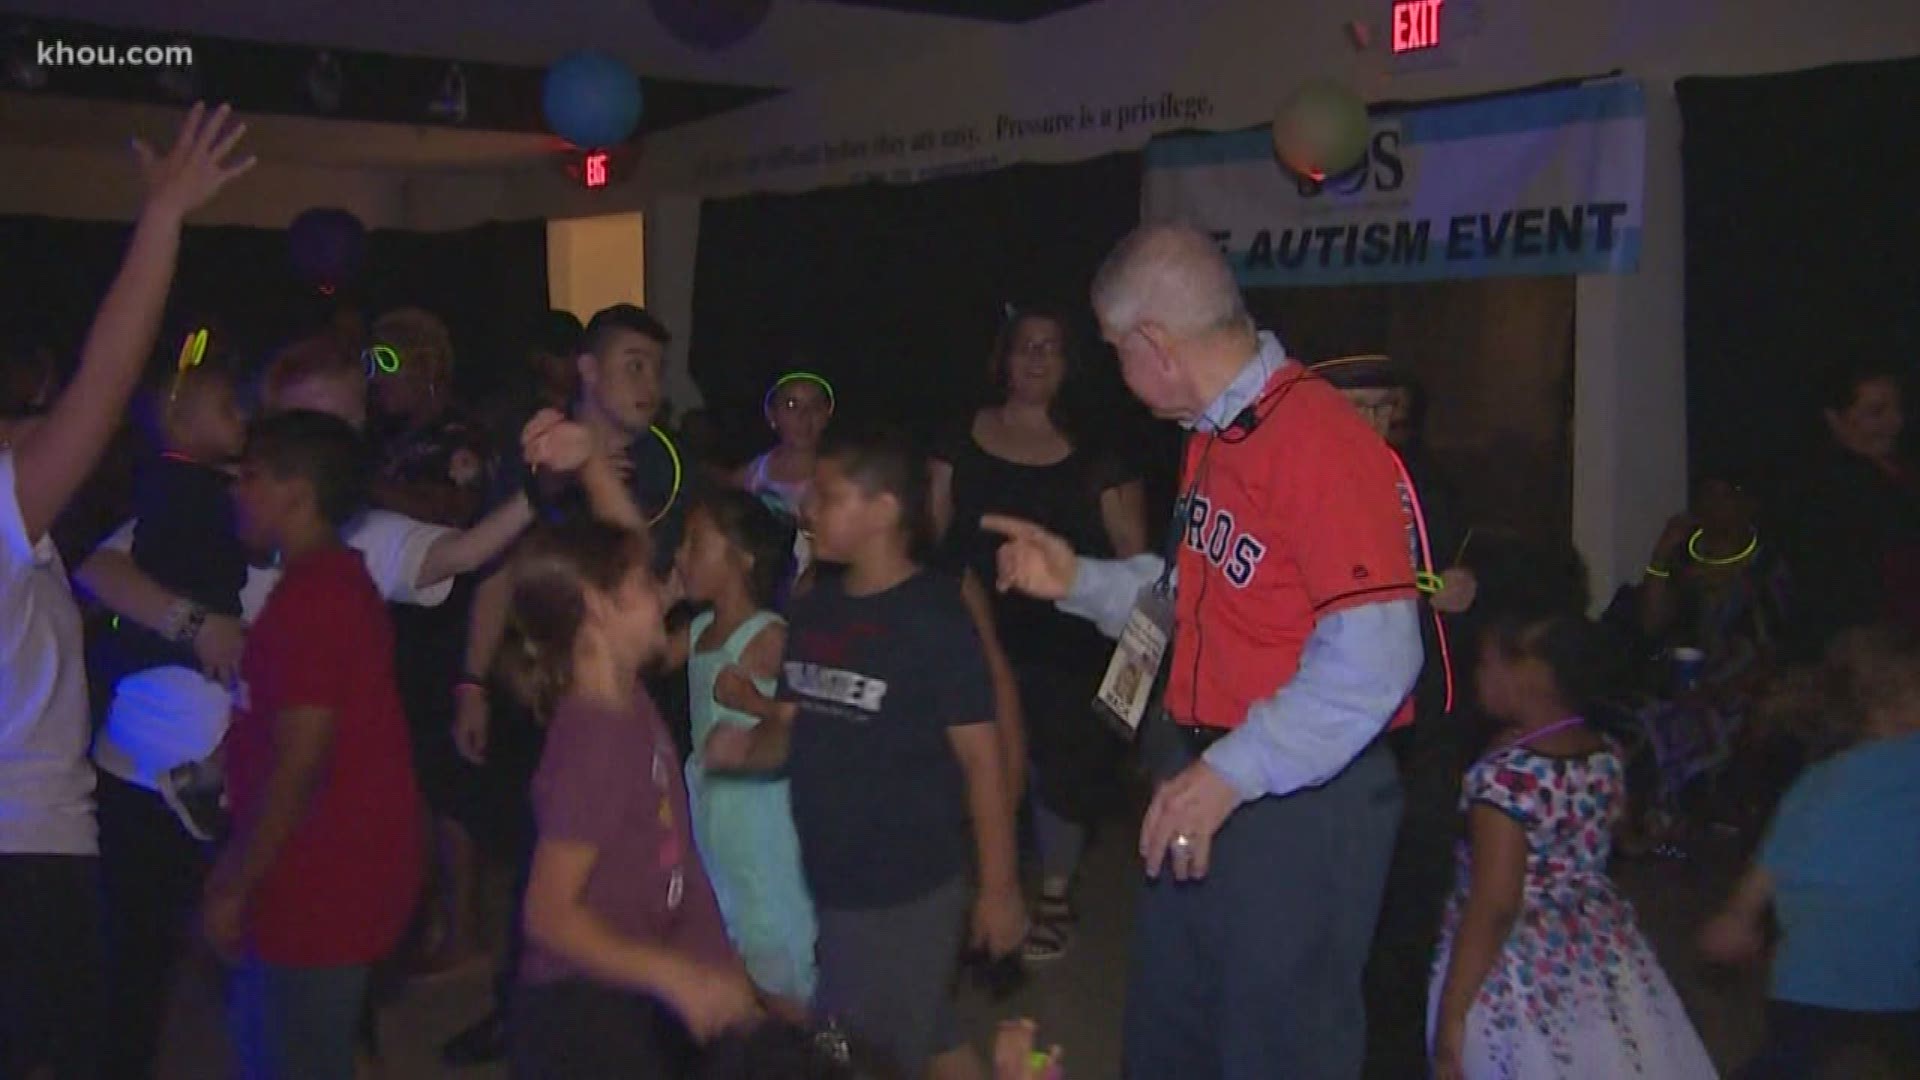 Gallery Furniture's Mattress Mack teamed up with Success on the Spectrum to host a prom for children with autism.